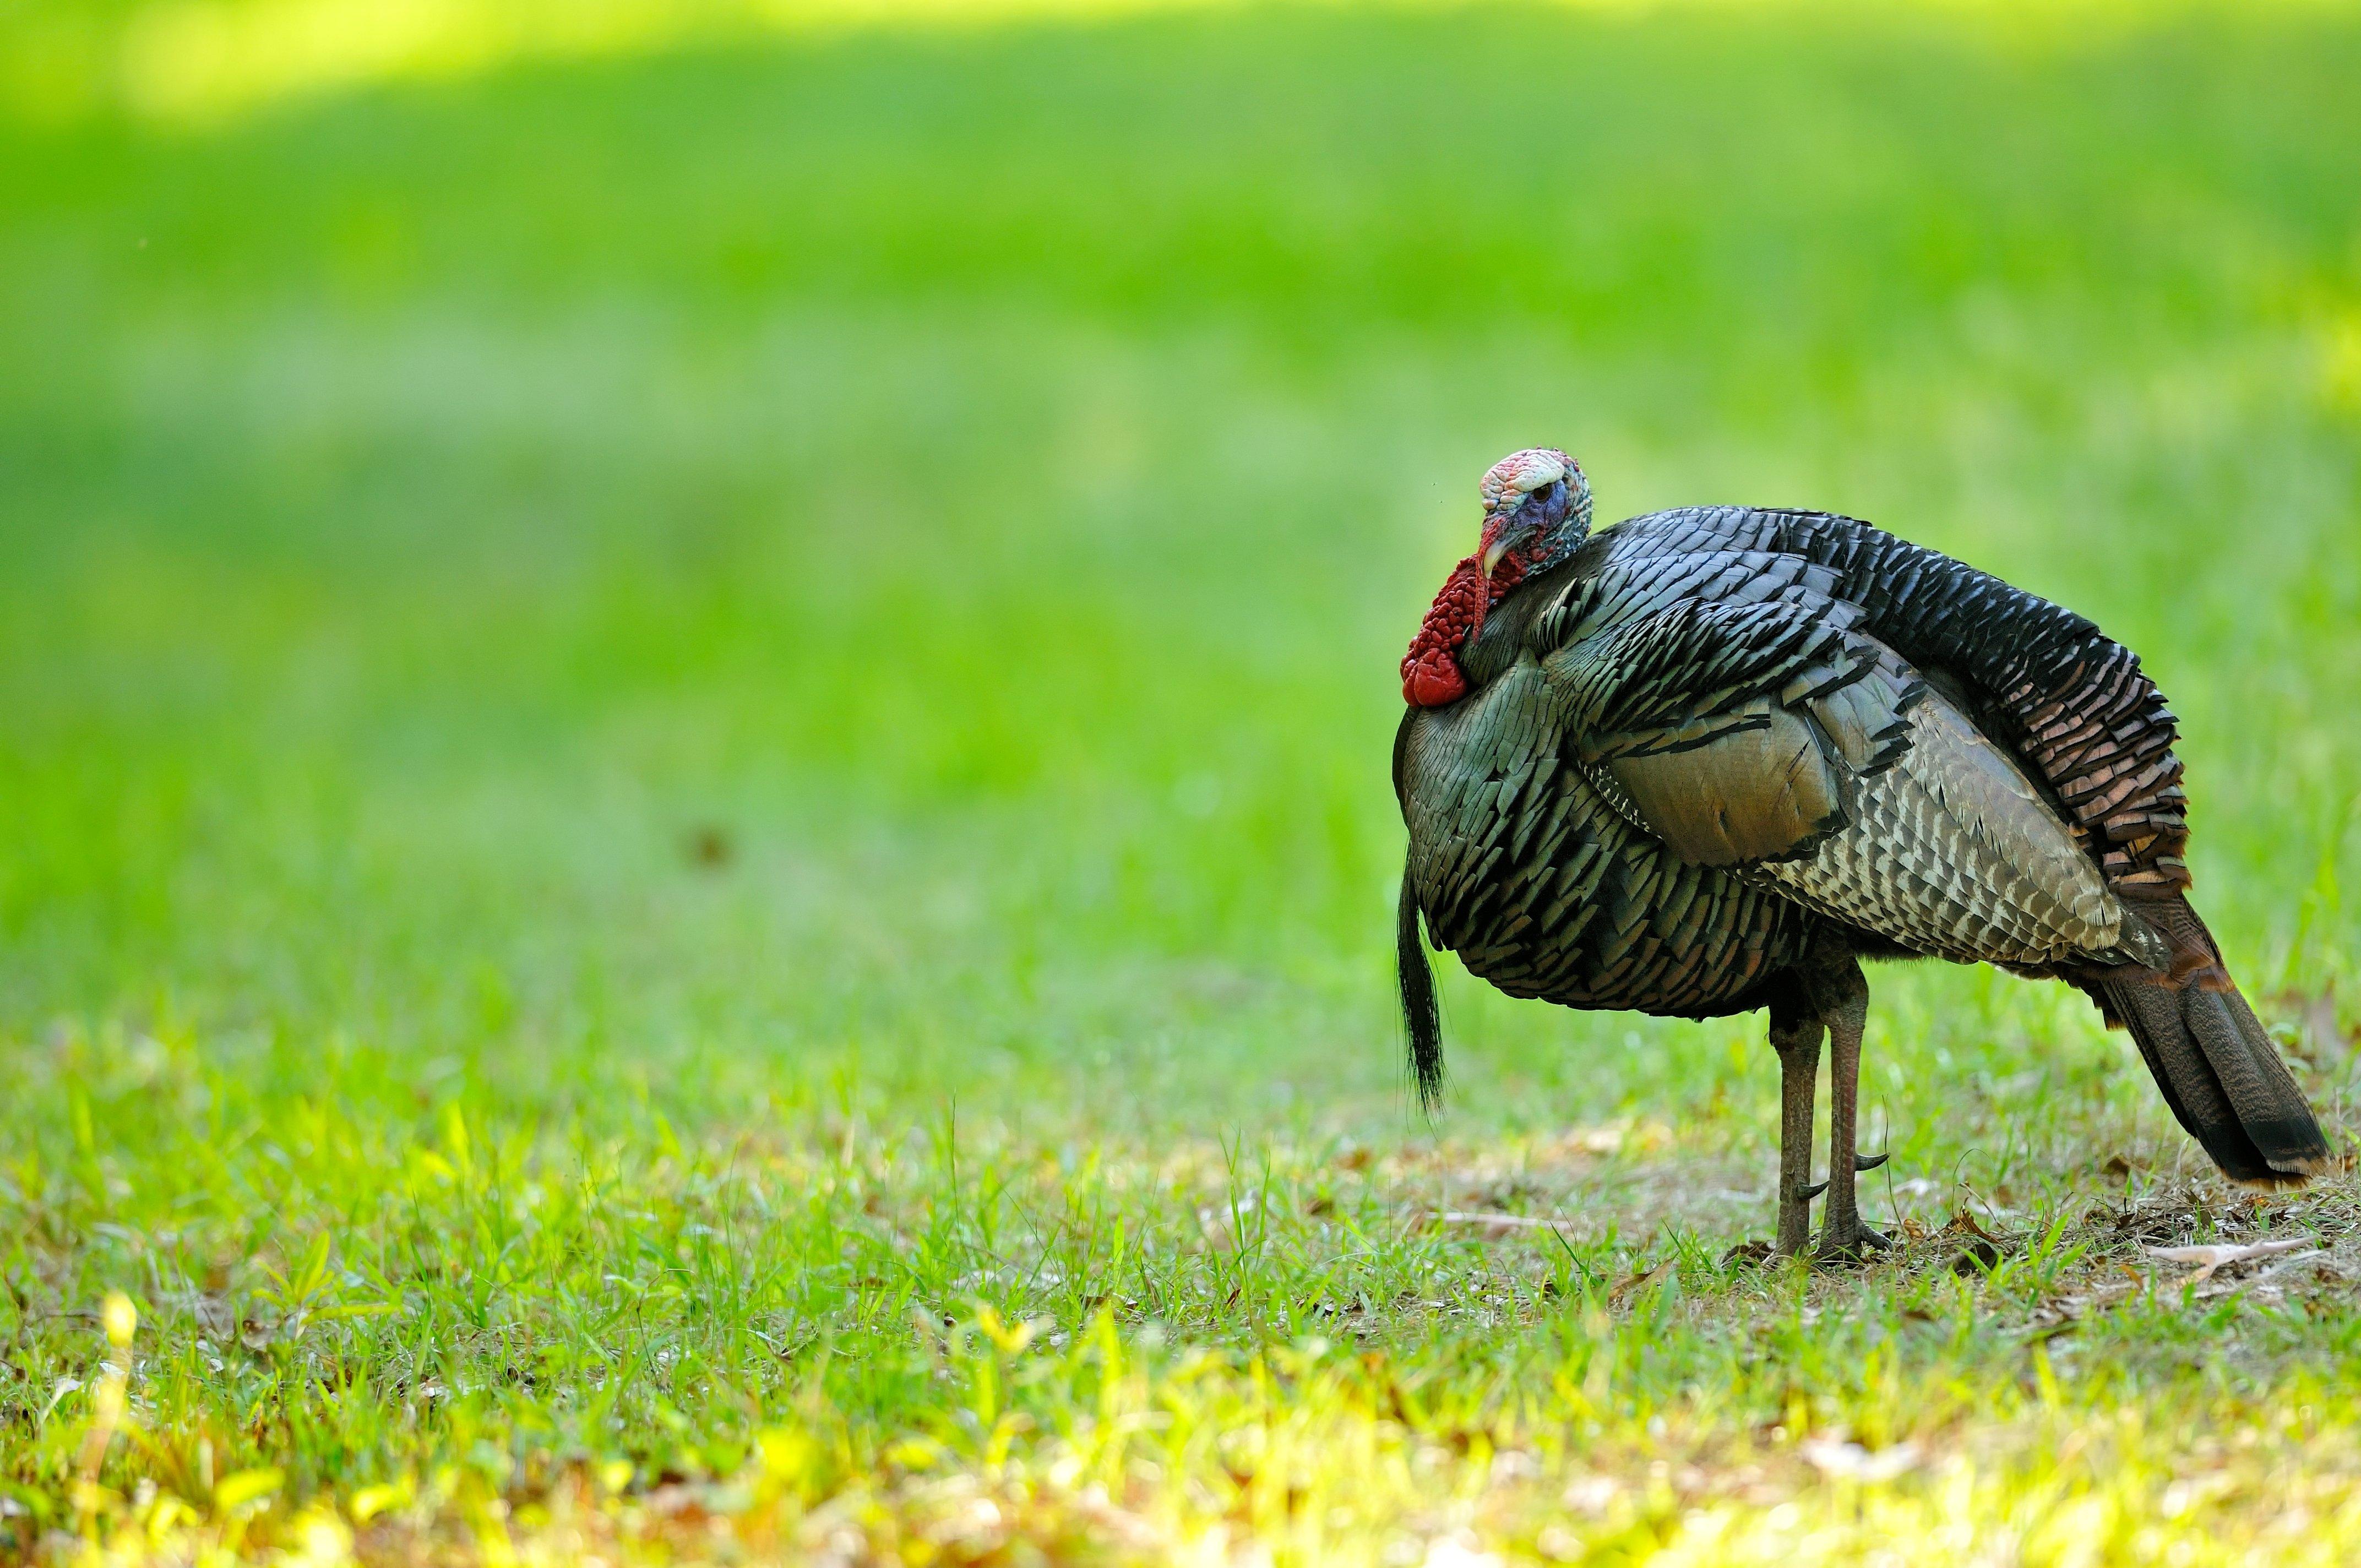 Turkey Hunting in Delaware. Image by Tes Randle Jolly